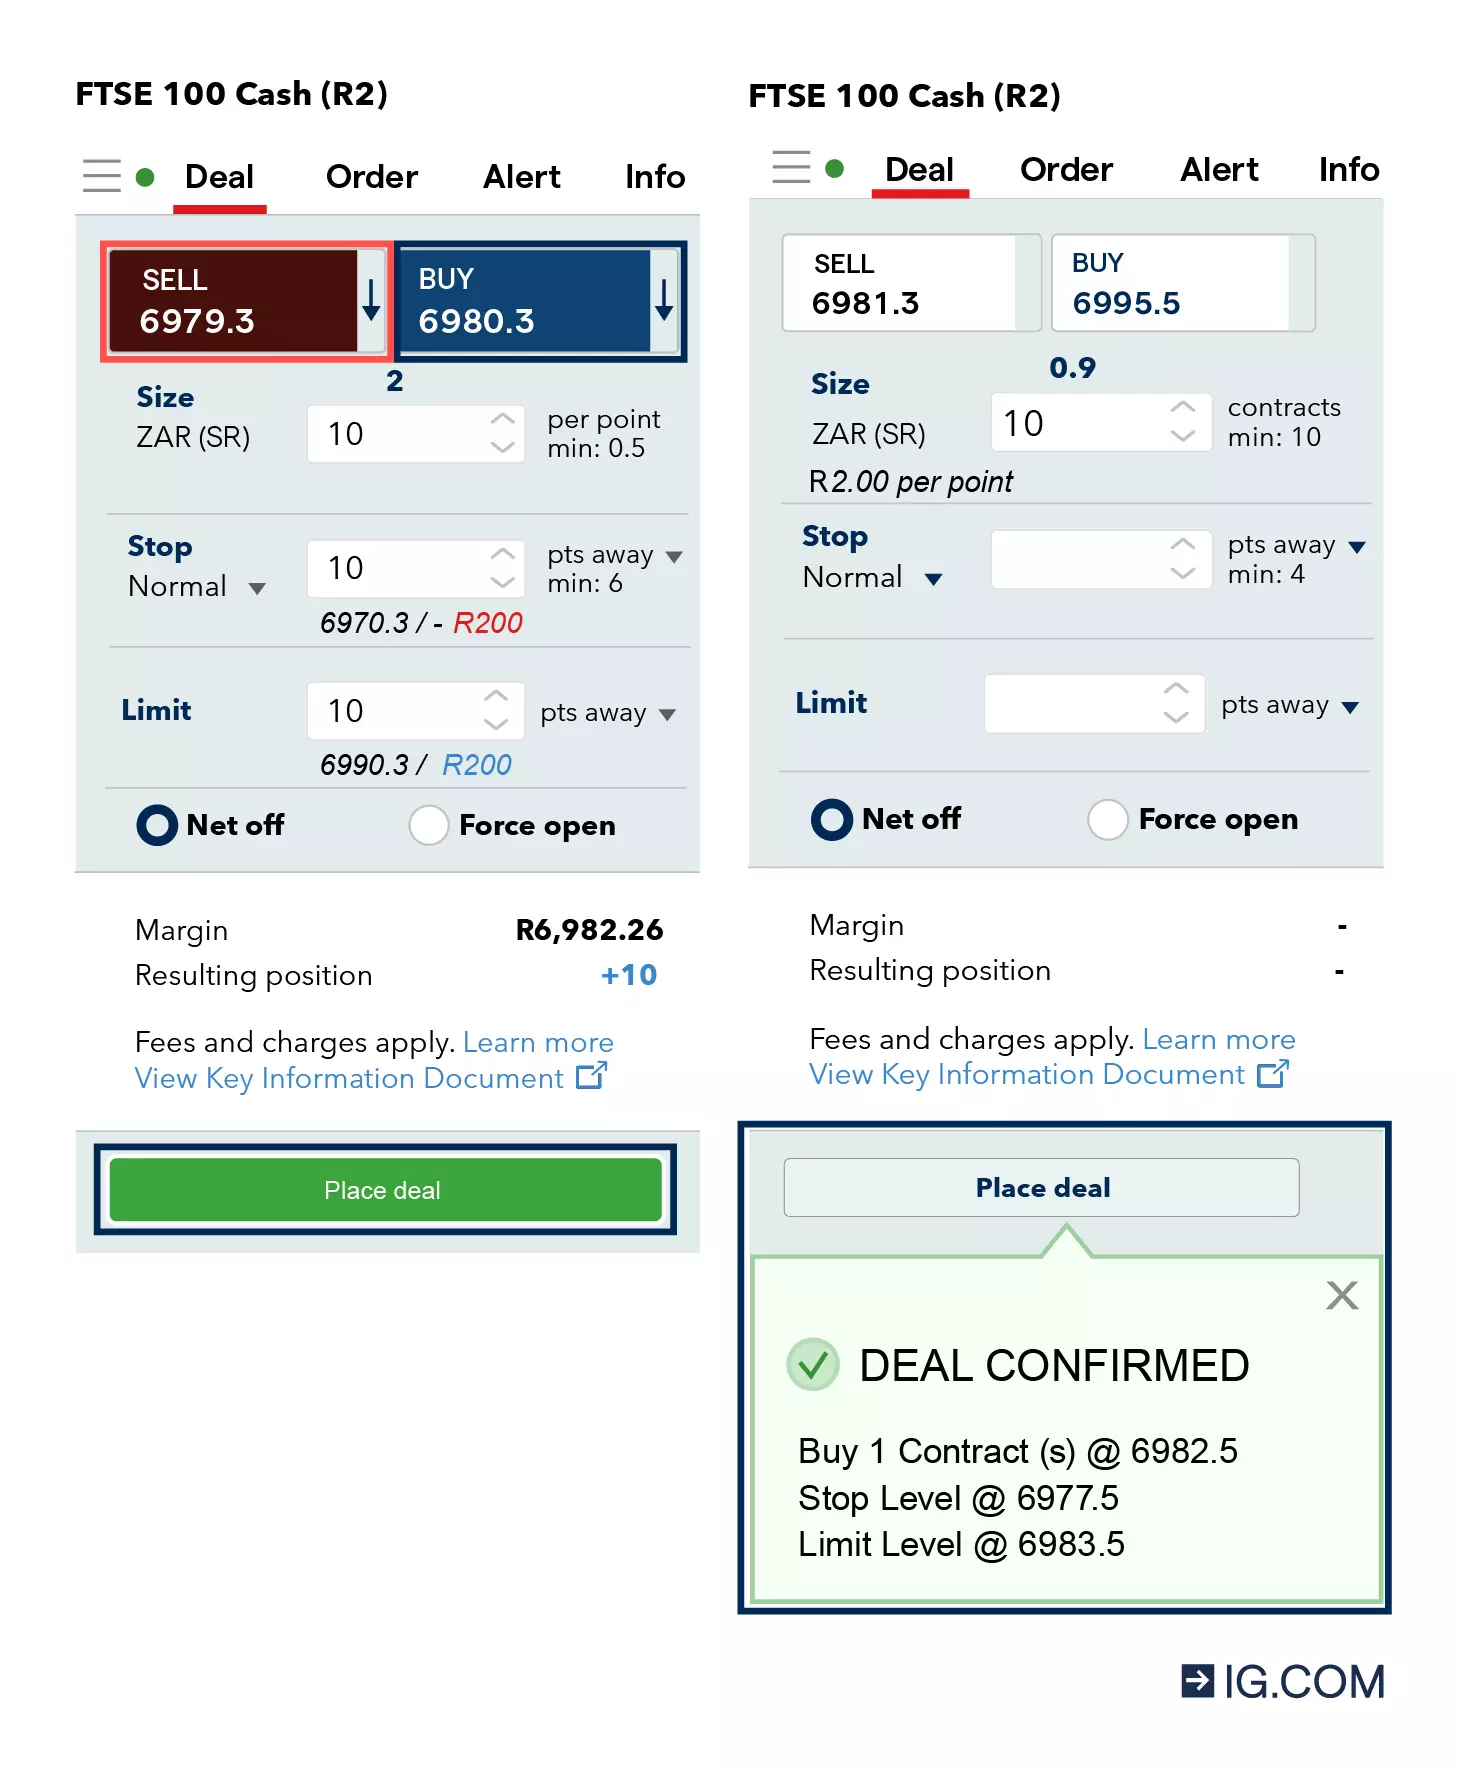 Two screenshots of the IG platform deal ticket showing how to place a trade and what it looks like when the deal is confirmed.